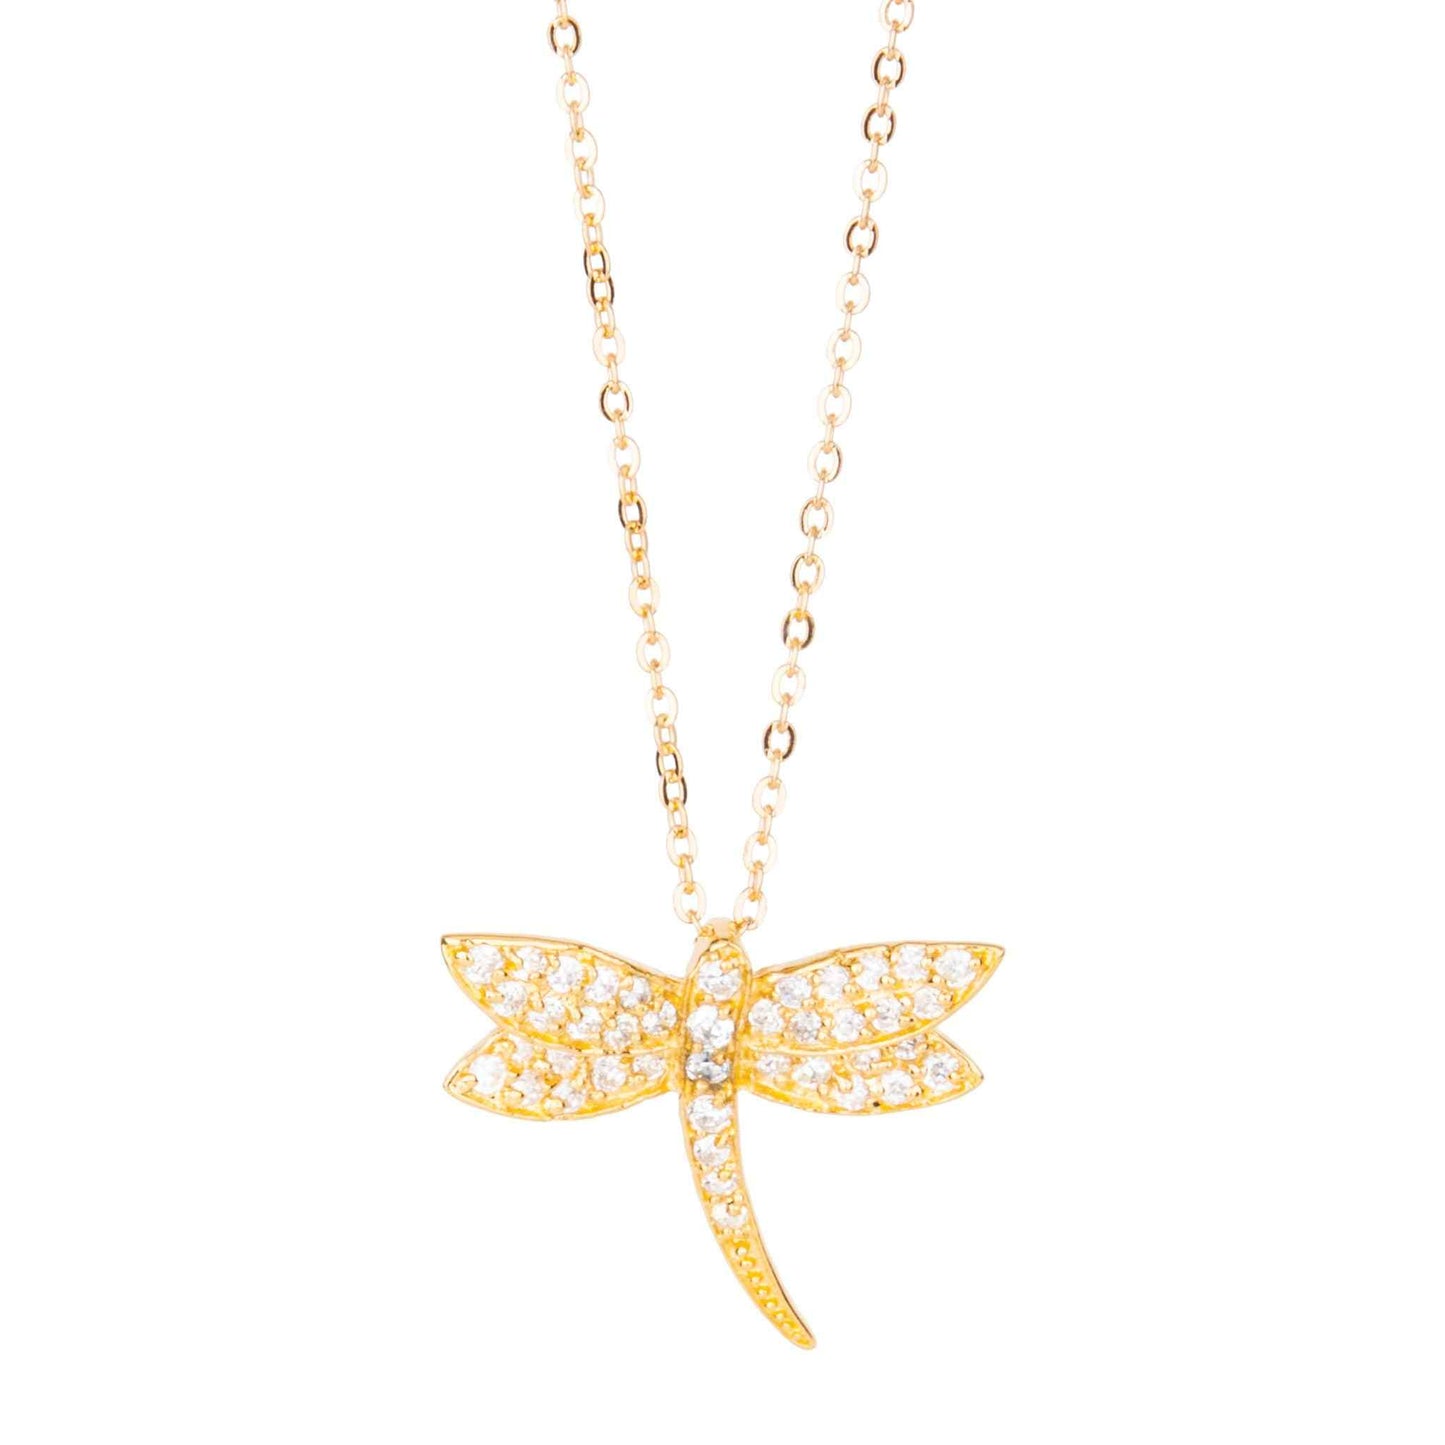 A simulated diamond pave dragonfly necklace displayed on a neutral white background.